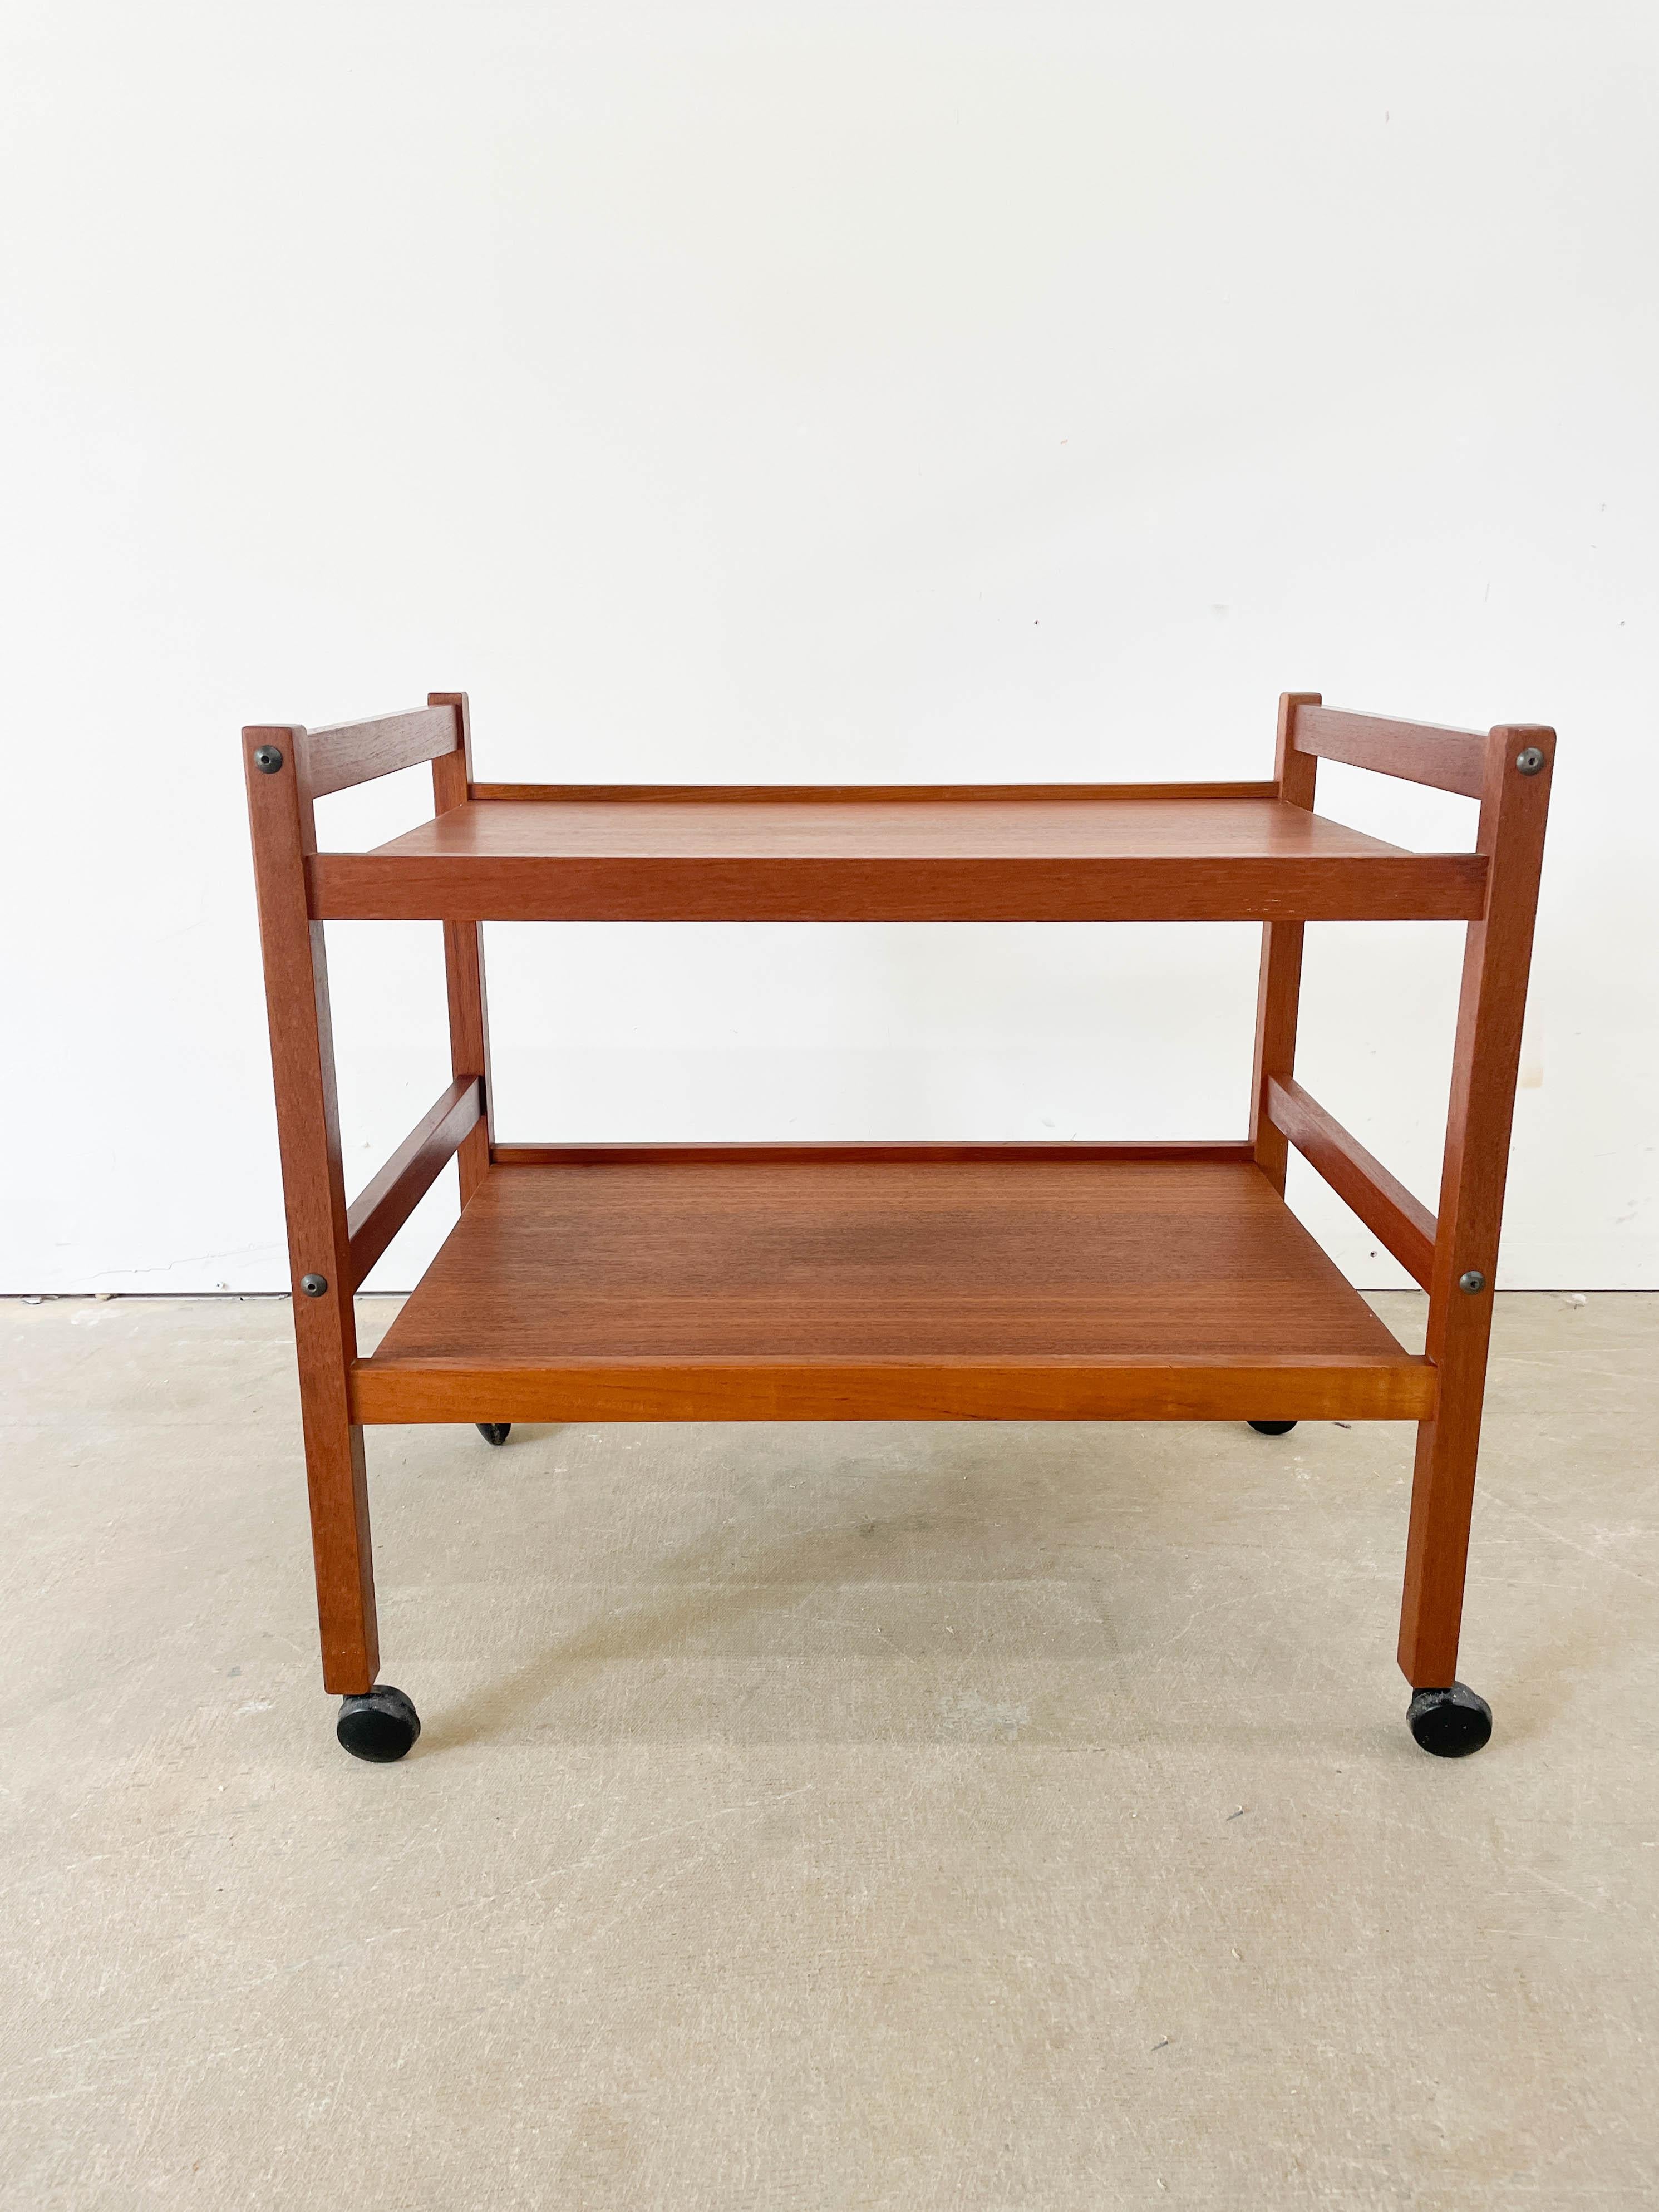 Minimalist Danish Modern teak tea or bar cart made in Denmark by Spottrup. Perfect for storing your teas, coffees, snacks, drinks or whatever else you fancy. Moves well with original casters and is very solidly built. Recently refinished, the teak